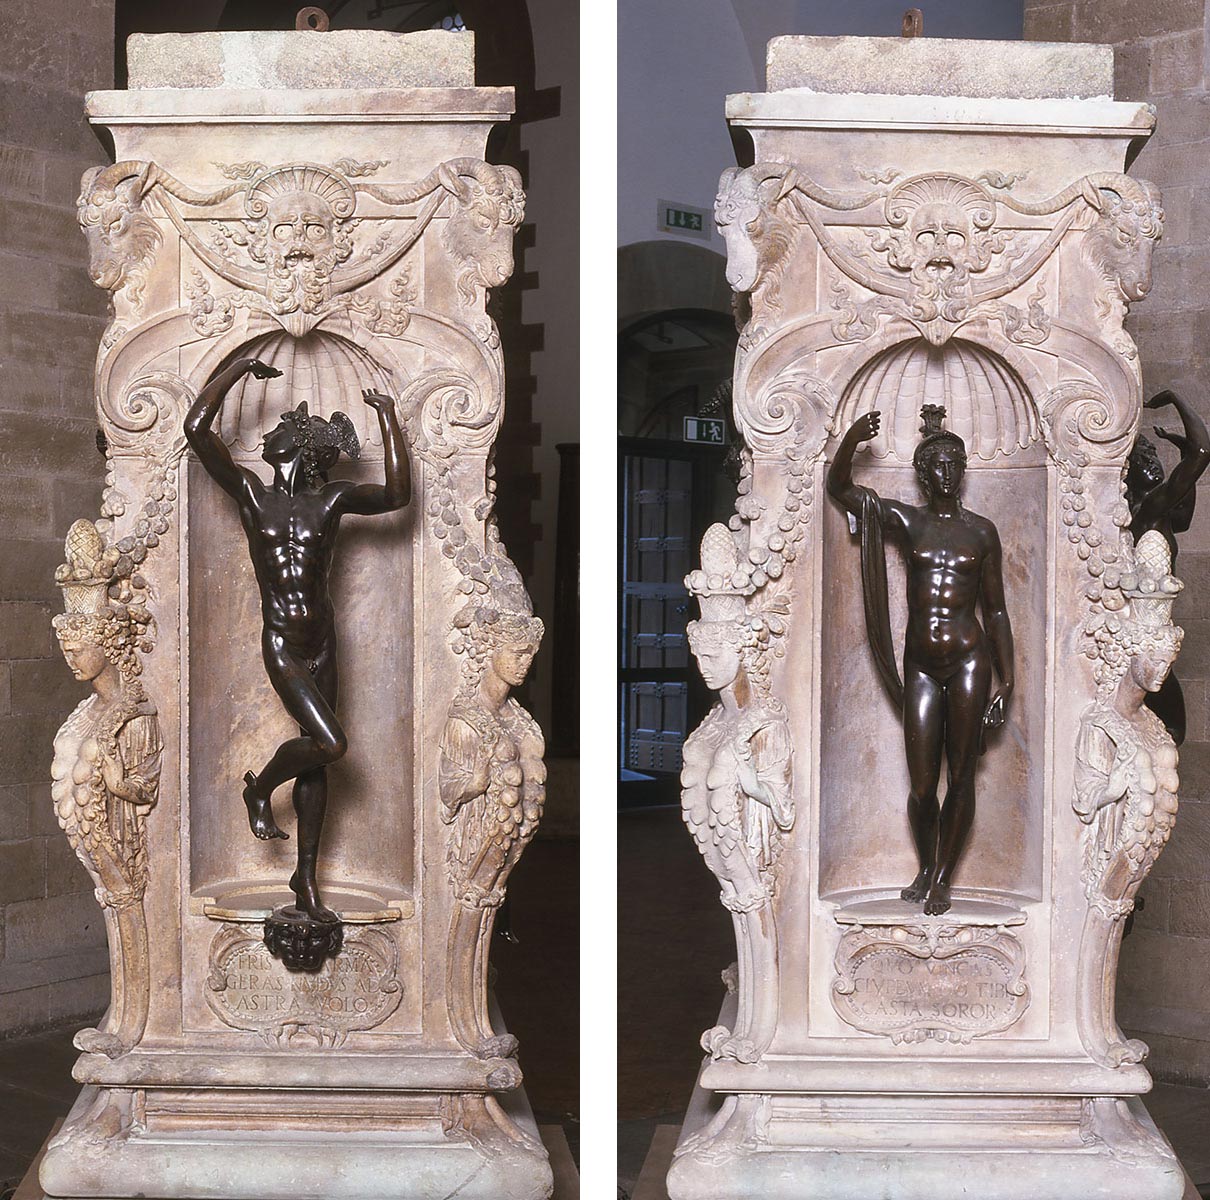 Statues of Mercury and Minerva. Photo: Ministry of Culture